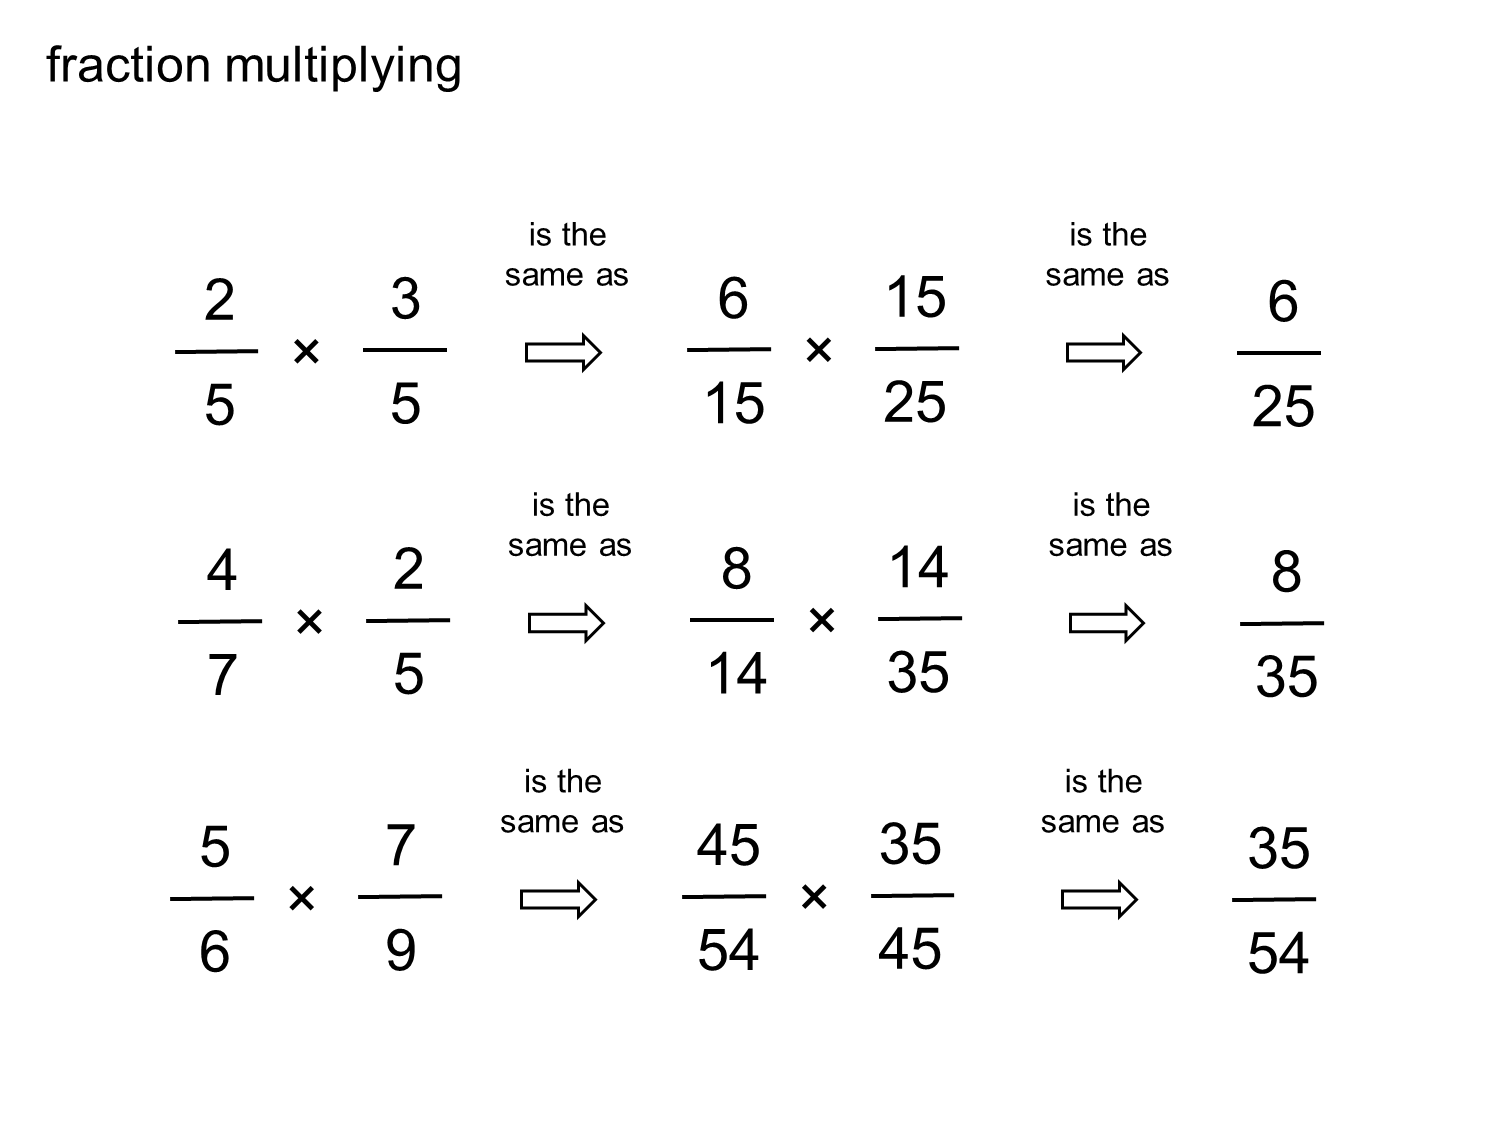 How To Multiply Fractions With Clear Examples?